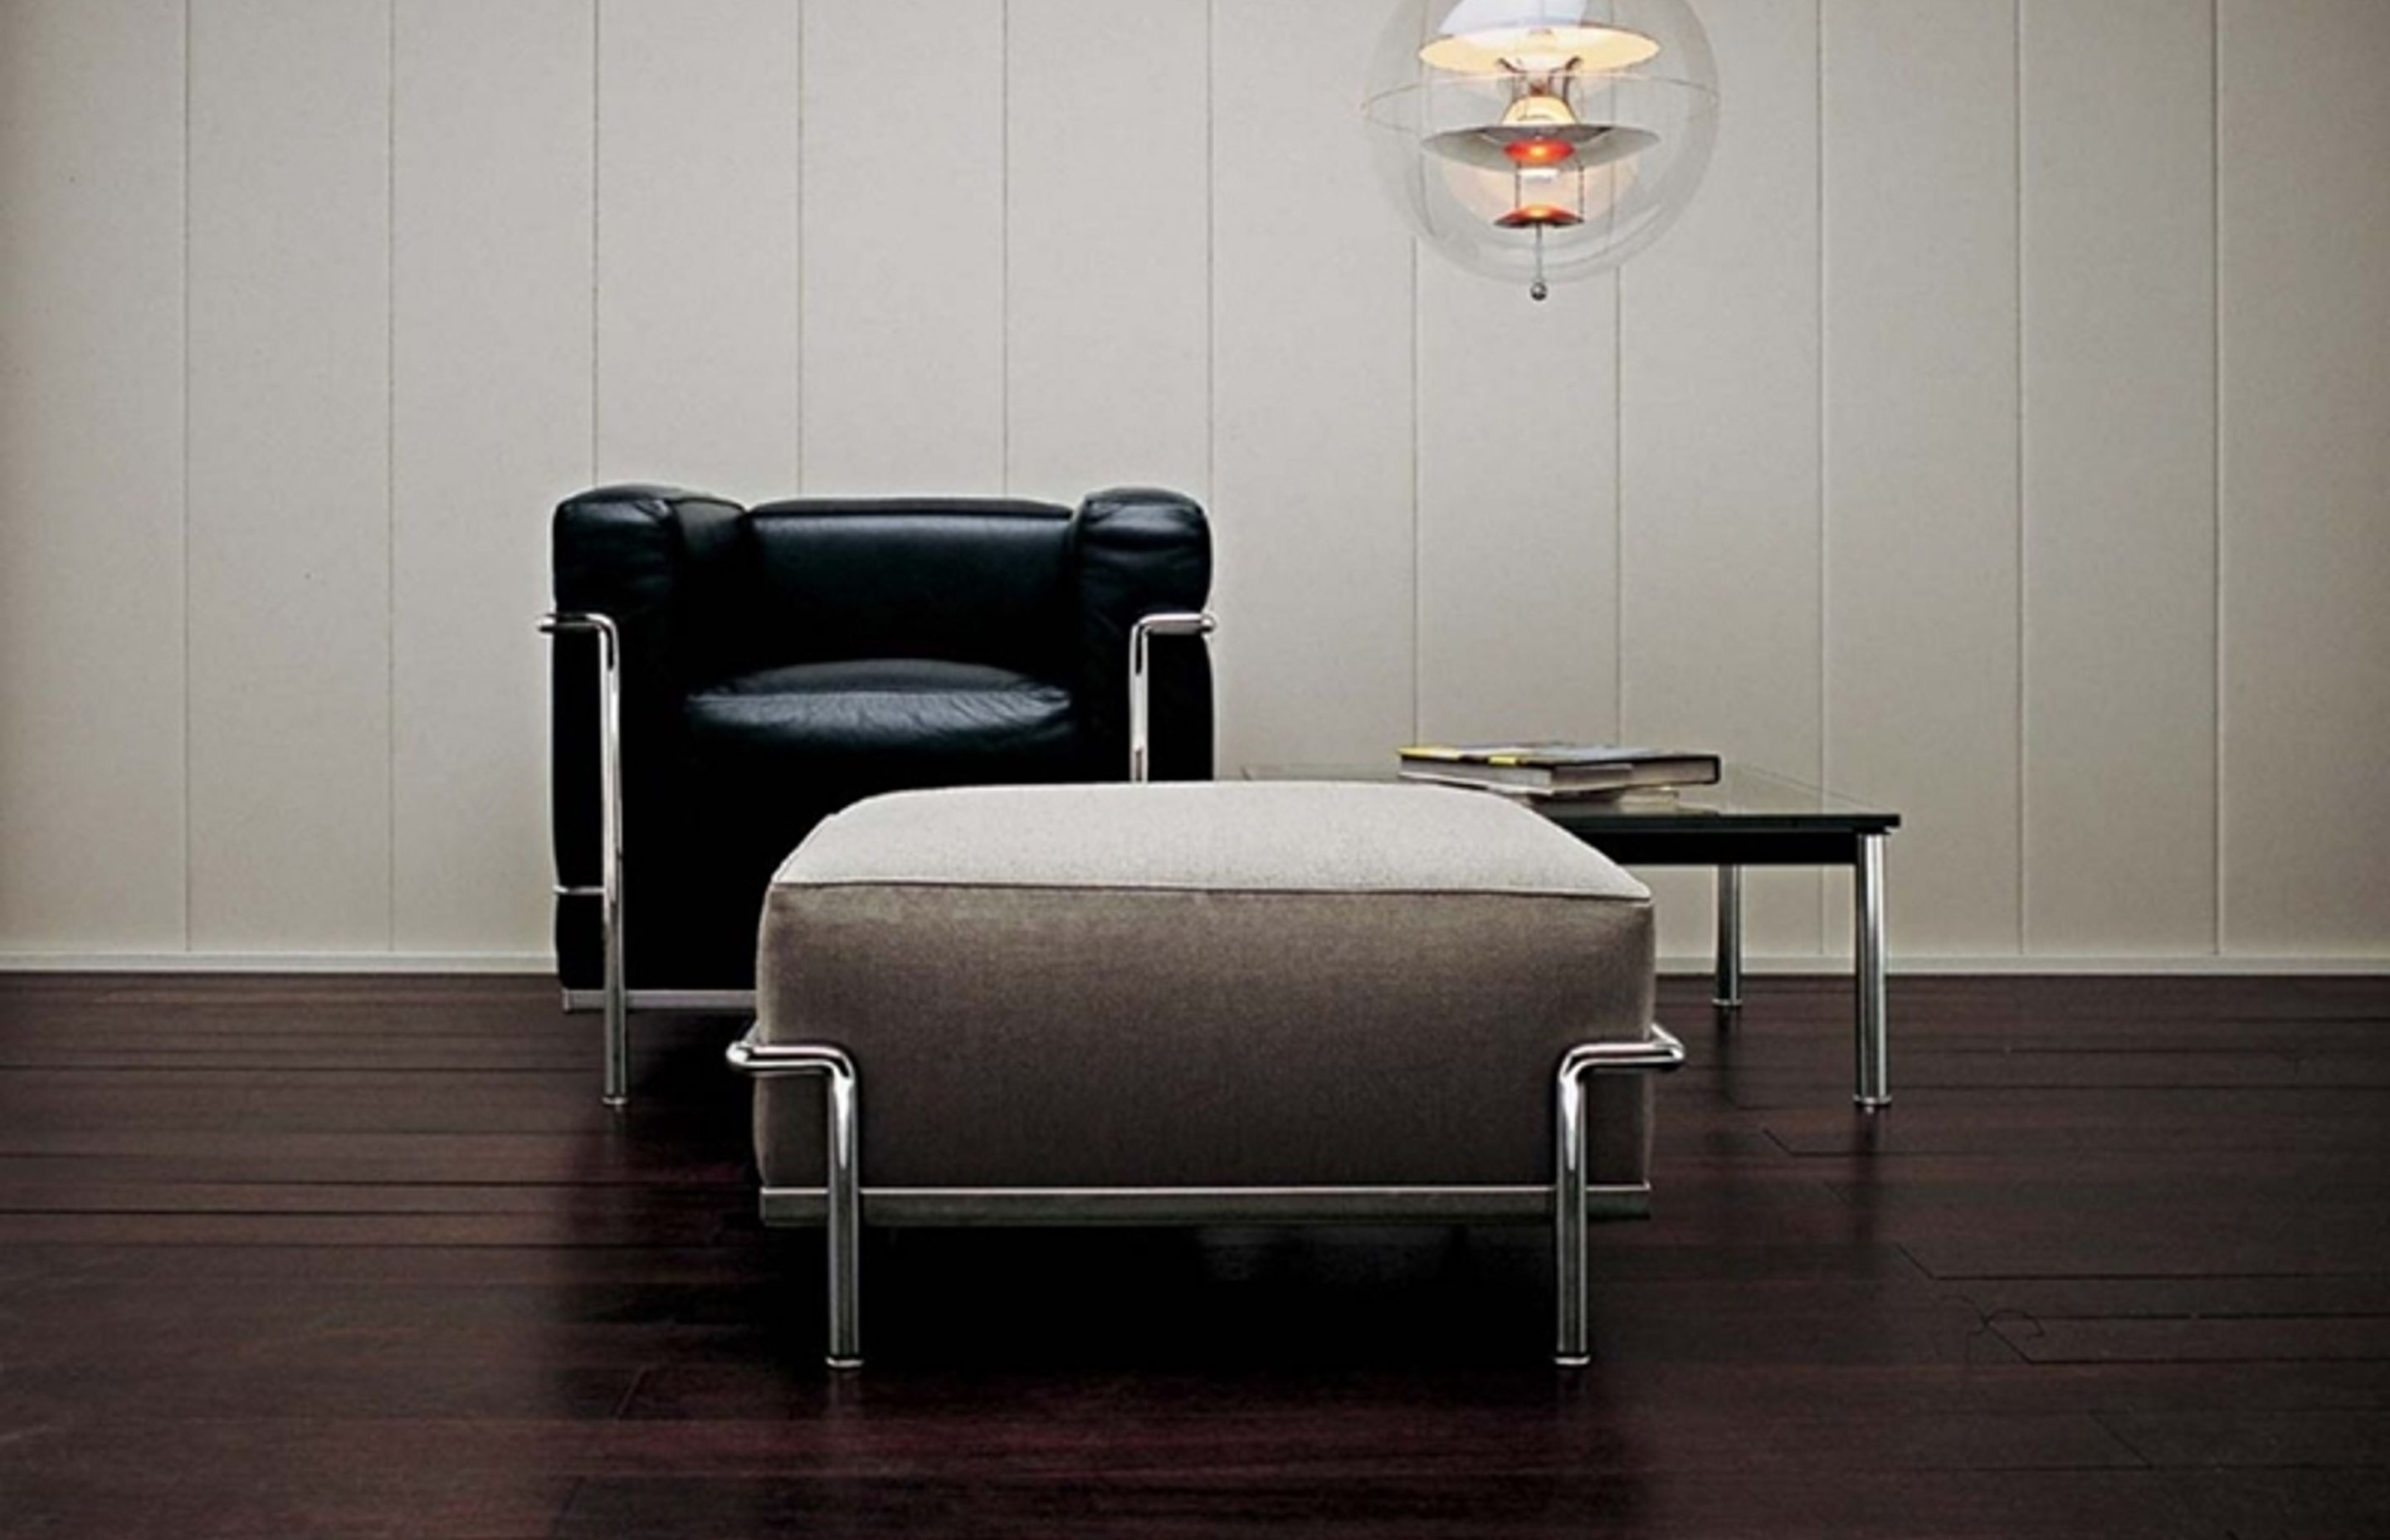 Statement industrial furniture pieces are trendy, such as this LC2 armchair from Matisse.